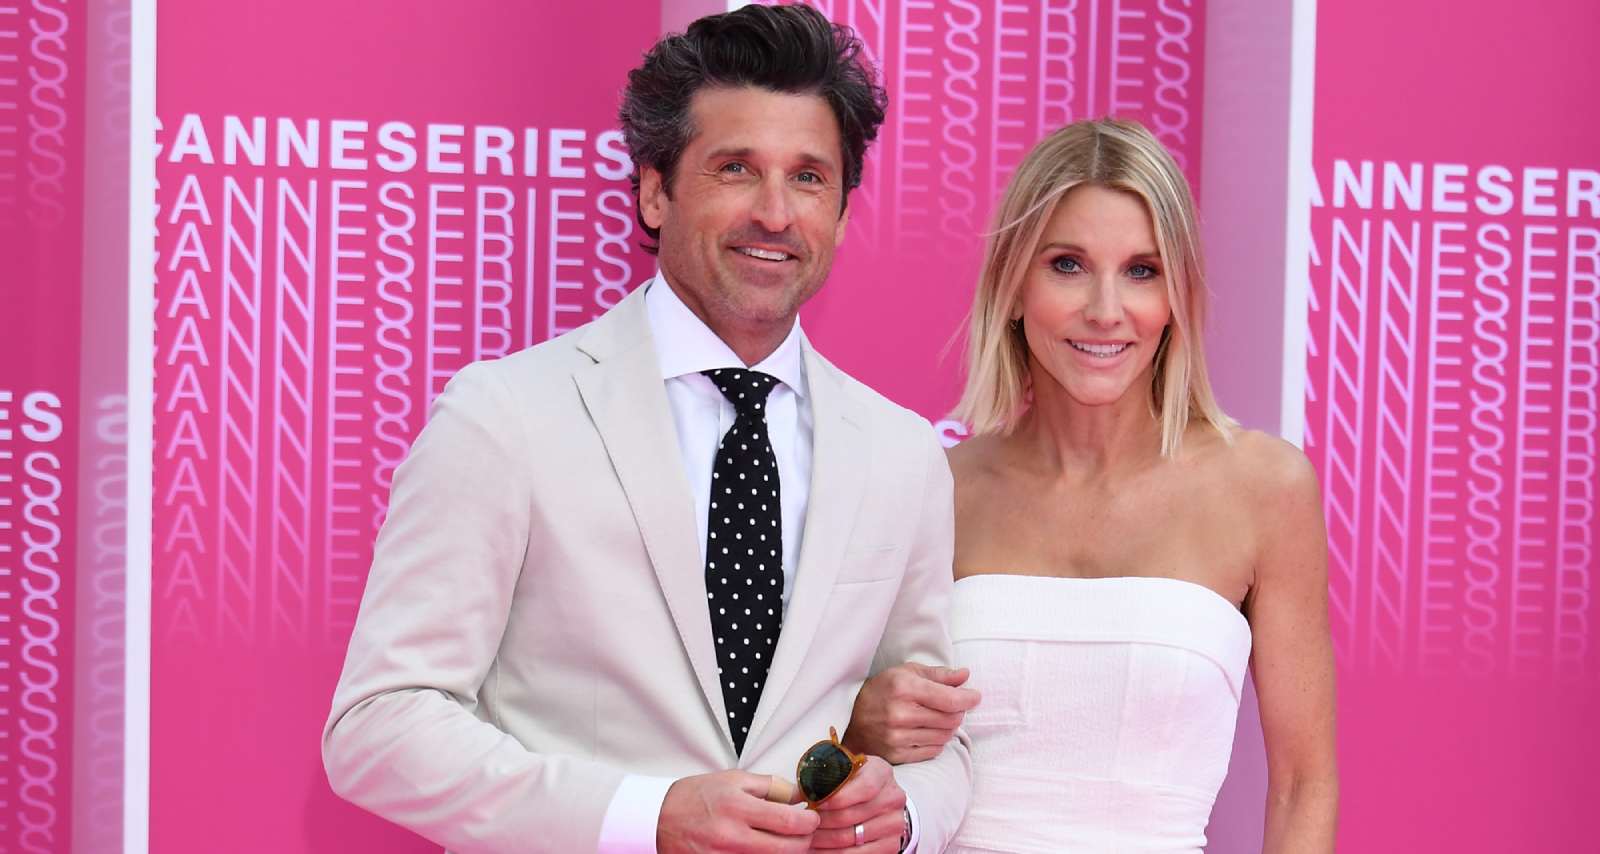 Jillian Fink Wiki, Age, Family, Sisters, Career, Hometown, Kids, Makeup Artist and Facts About Patrick Dempsey’s Wife